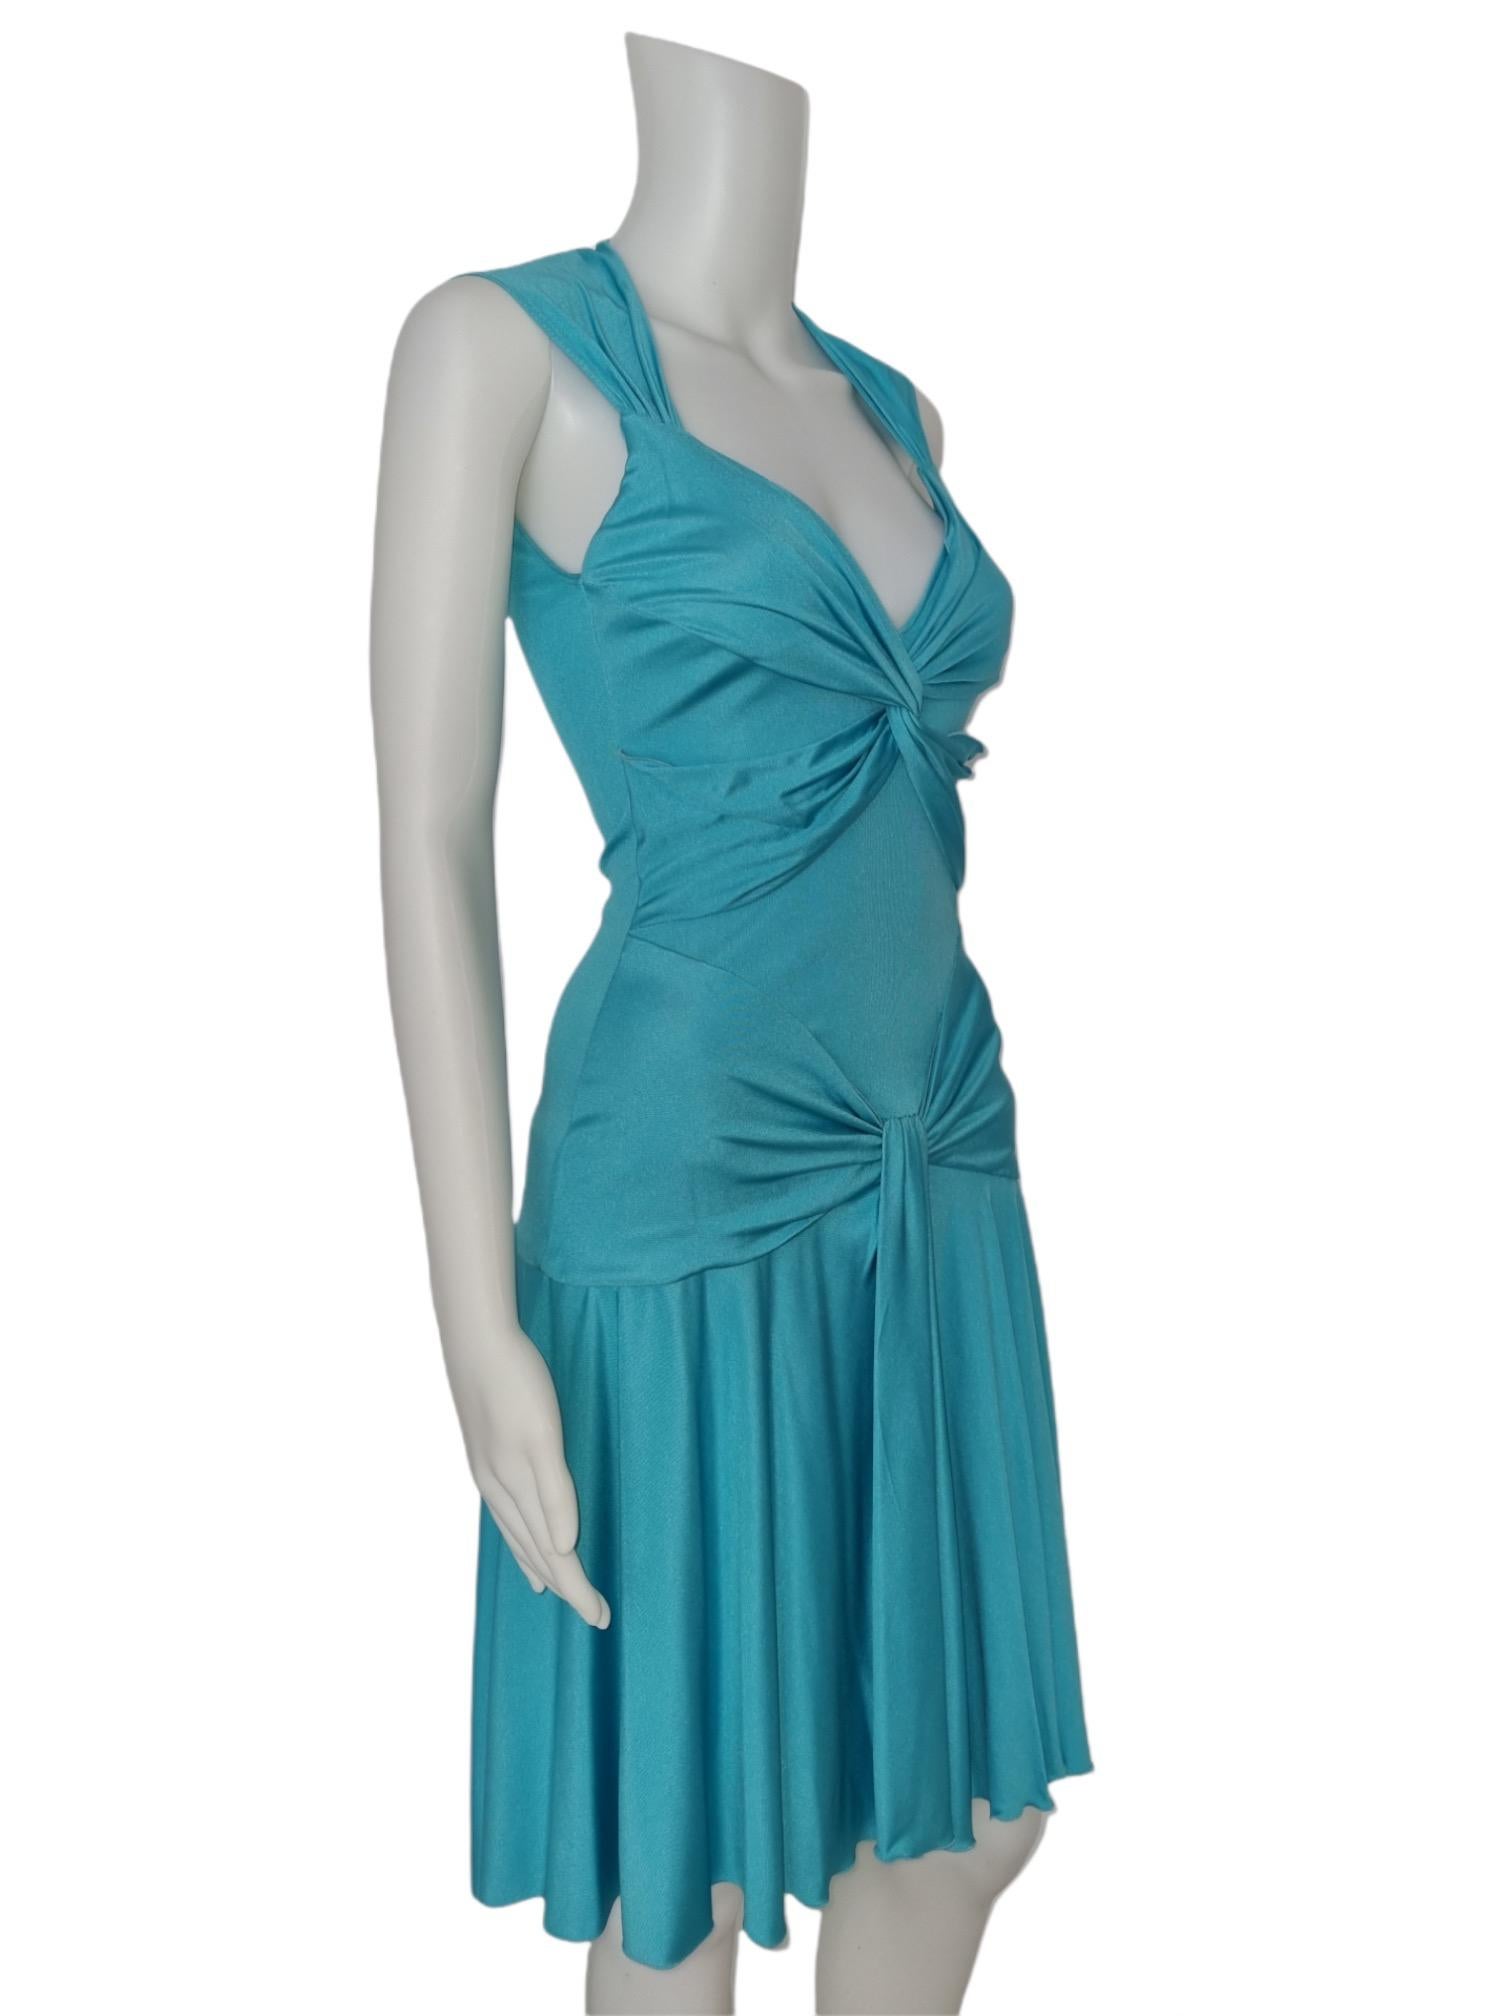 We present this Iconic sexy Valentino runway dress from the beautiful and feminine Spring 2004 collection. Variations of this dress have been worn by Naomi Campbell and Christina Aguilera.
Size: UK 8
Material: Silk

Condition: Excellent vintage